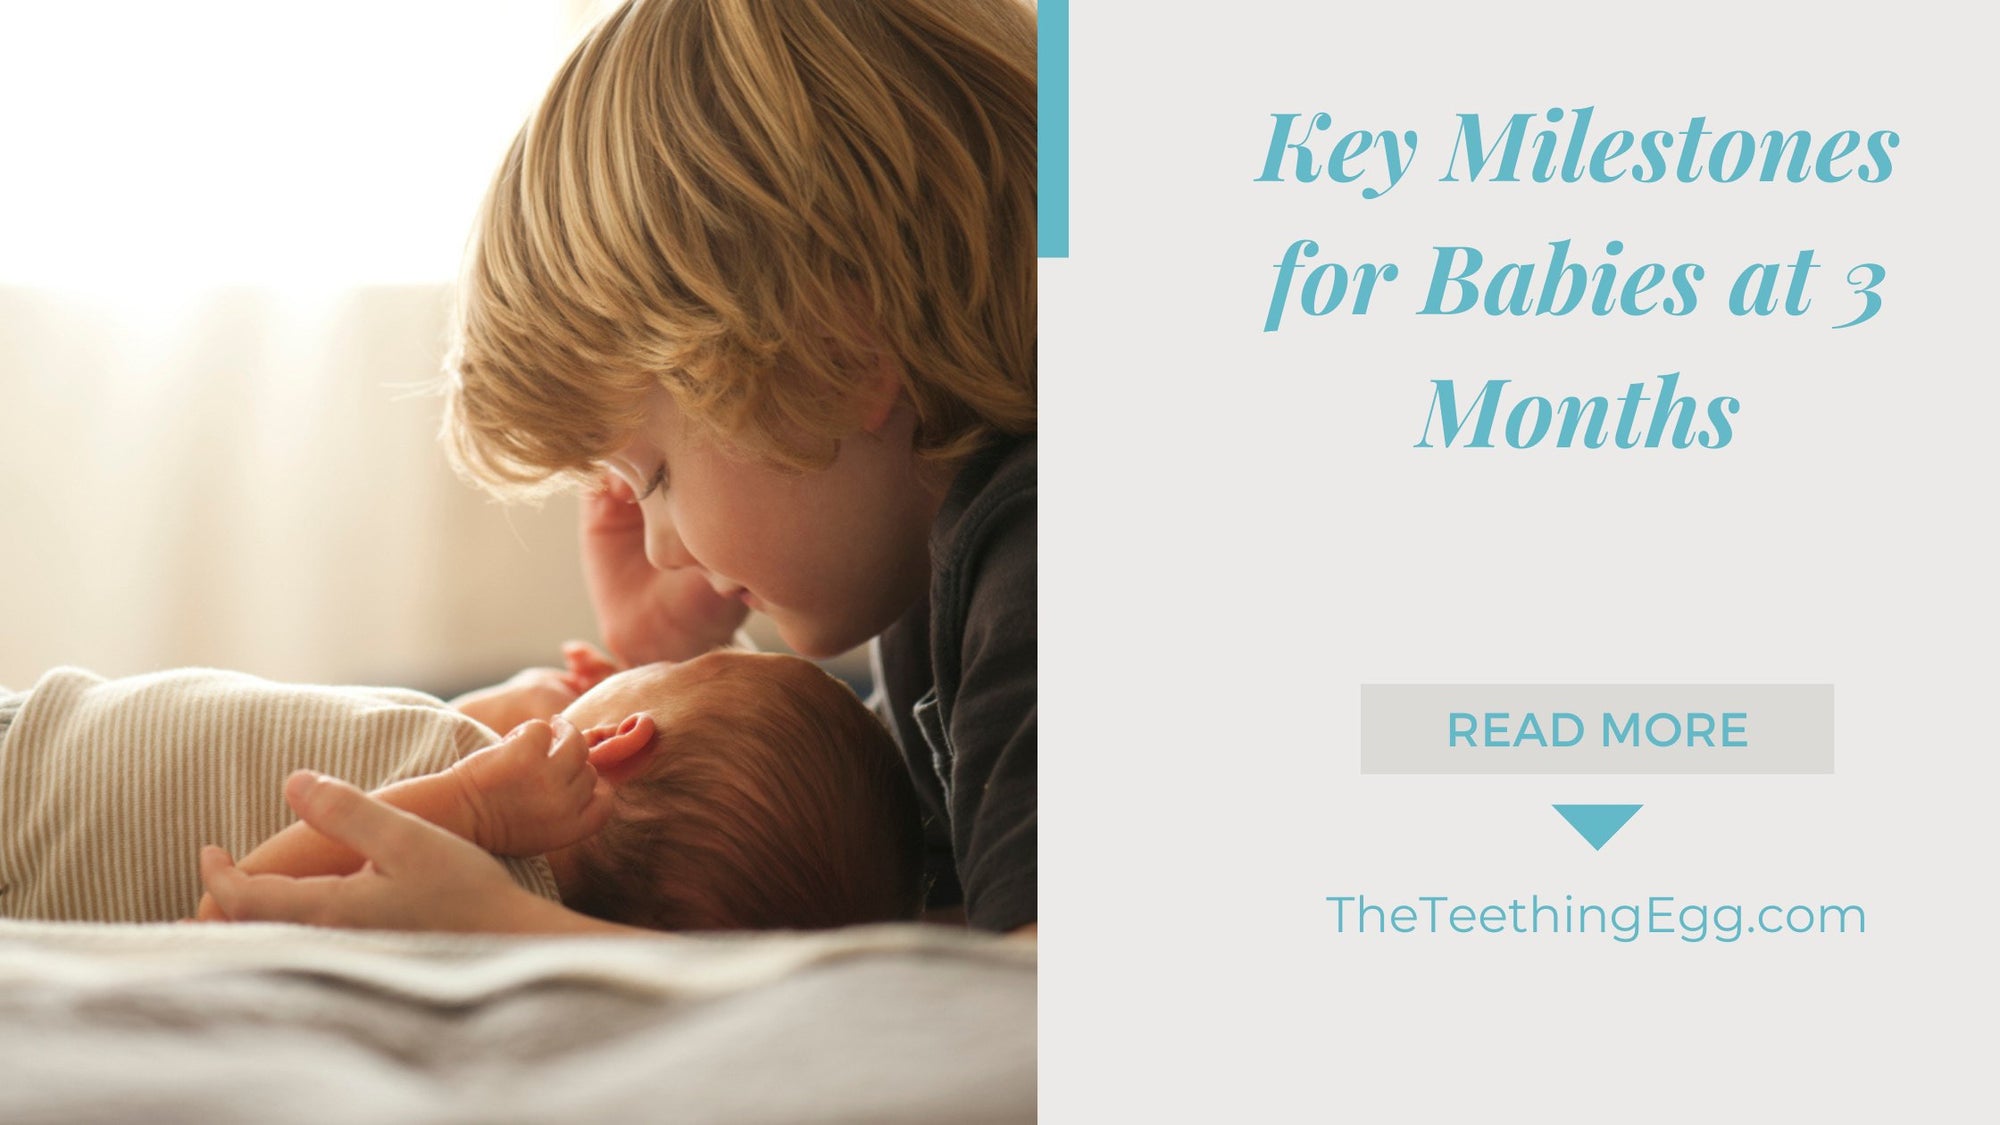 Key Milestones for Babies at 3 Months: Why They Matter and What to Do if They're Not Met